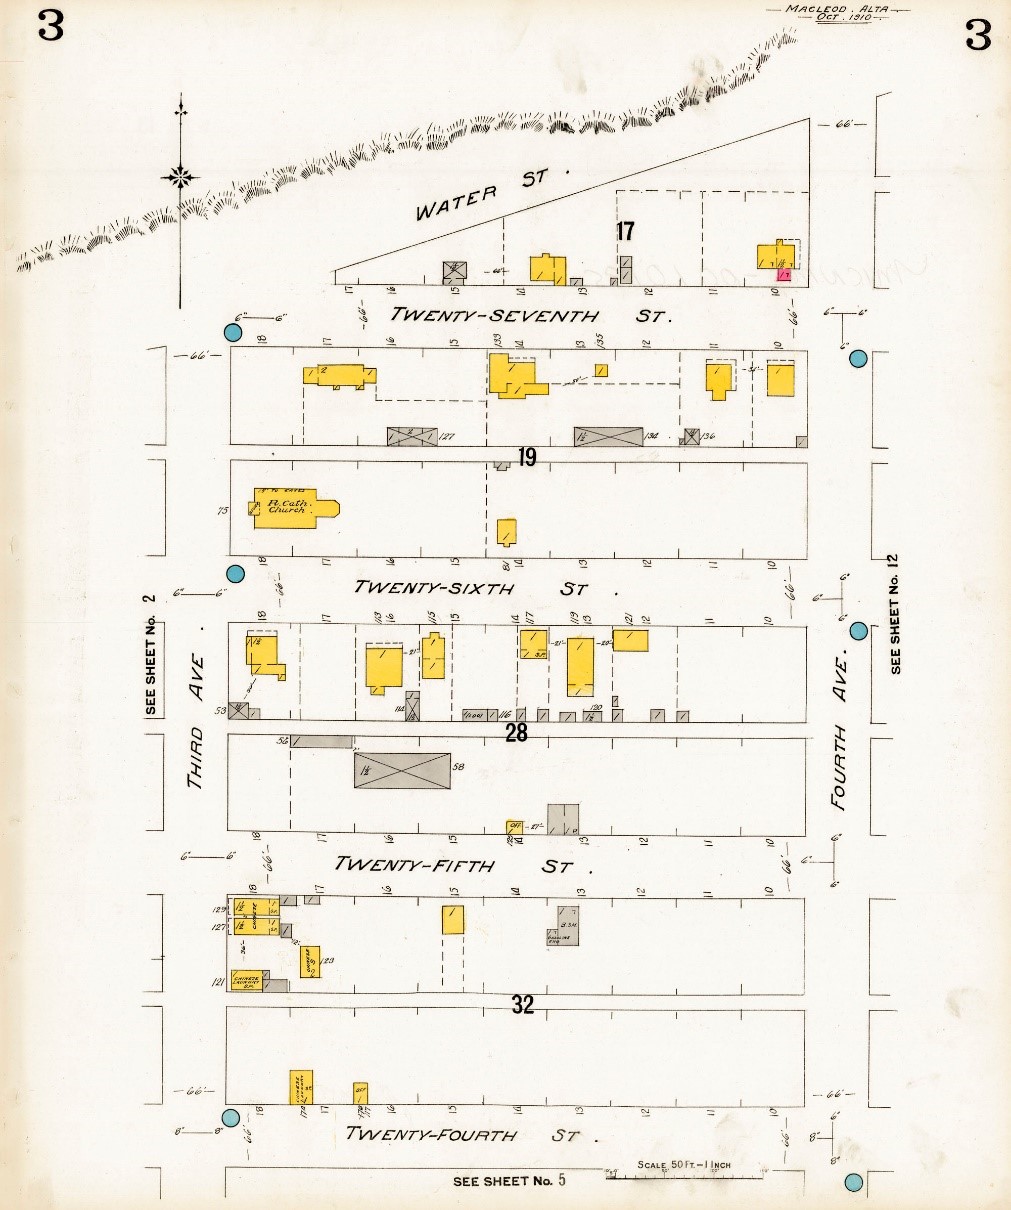 1910 Fire Insurance Map of Town of Fort MacLeod, The Quon Sang Lung Laundry Shop is located on 24th St. and 3rd Ave.